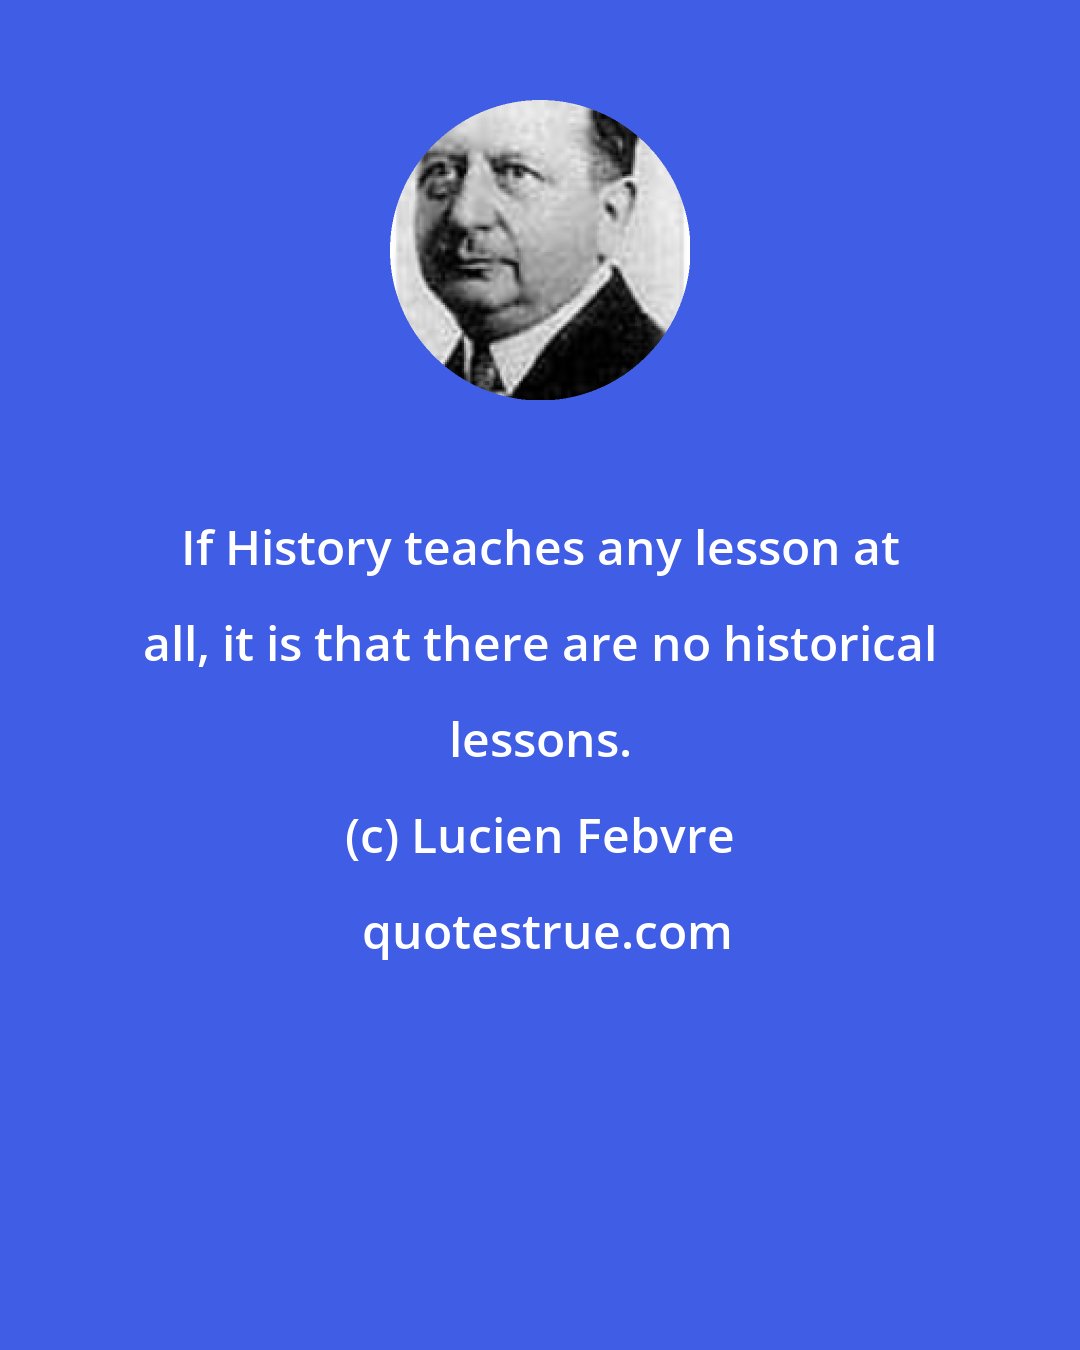 Lucien Febvre: If History teaches any lesson at all, it is that there are no historical lessons.